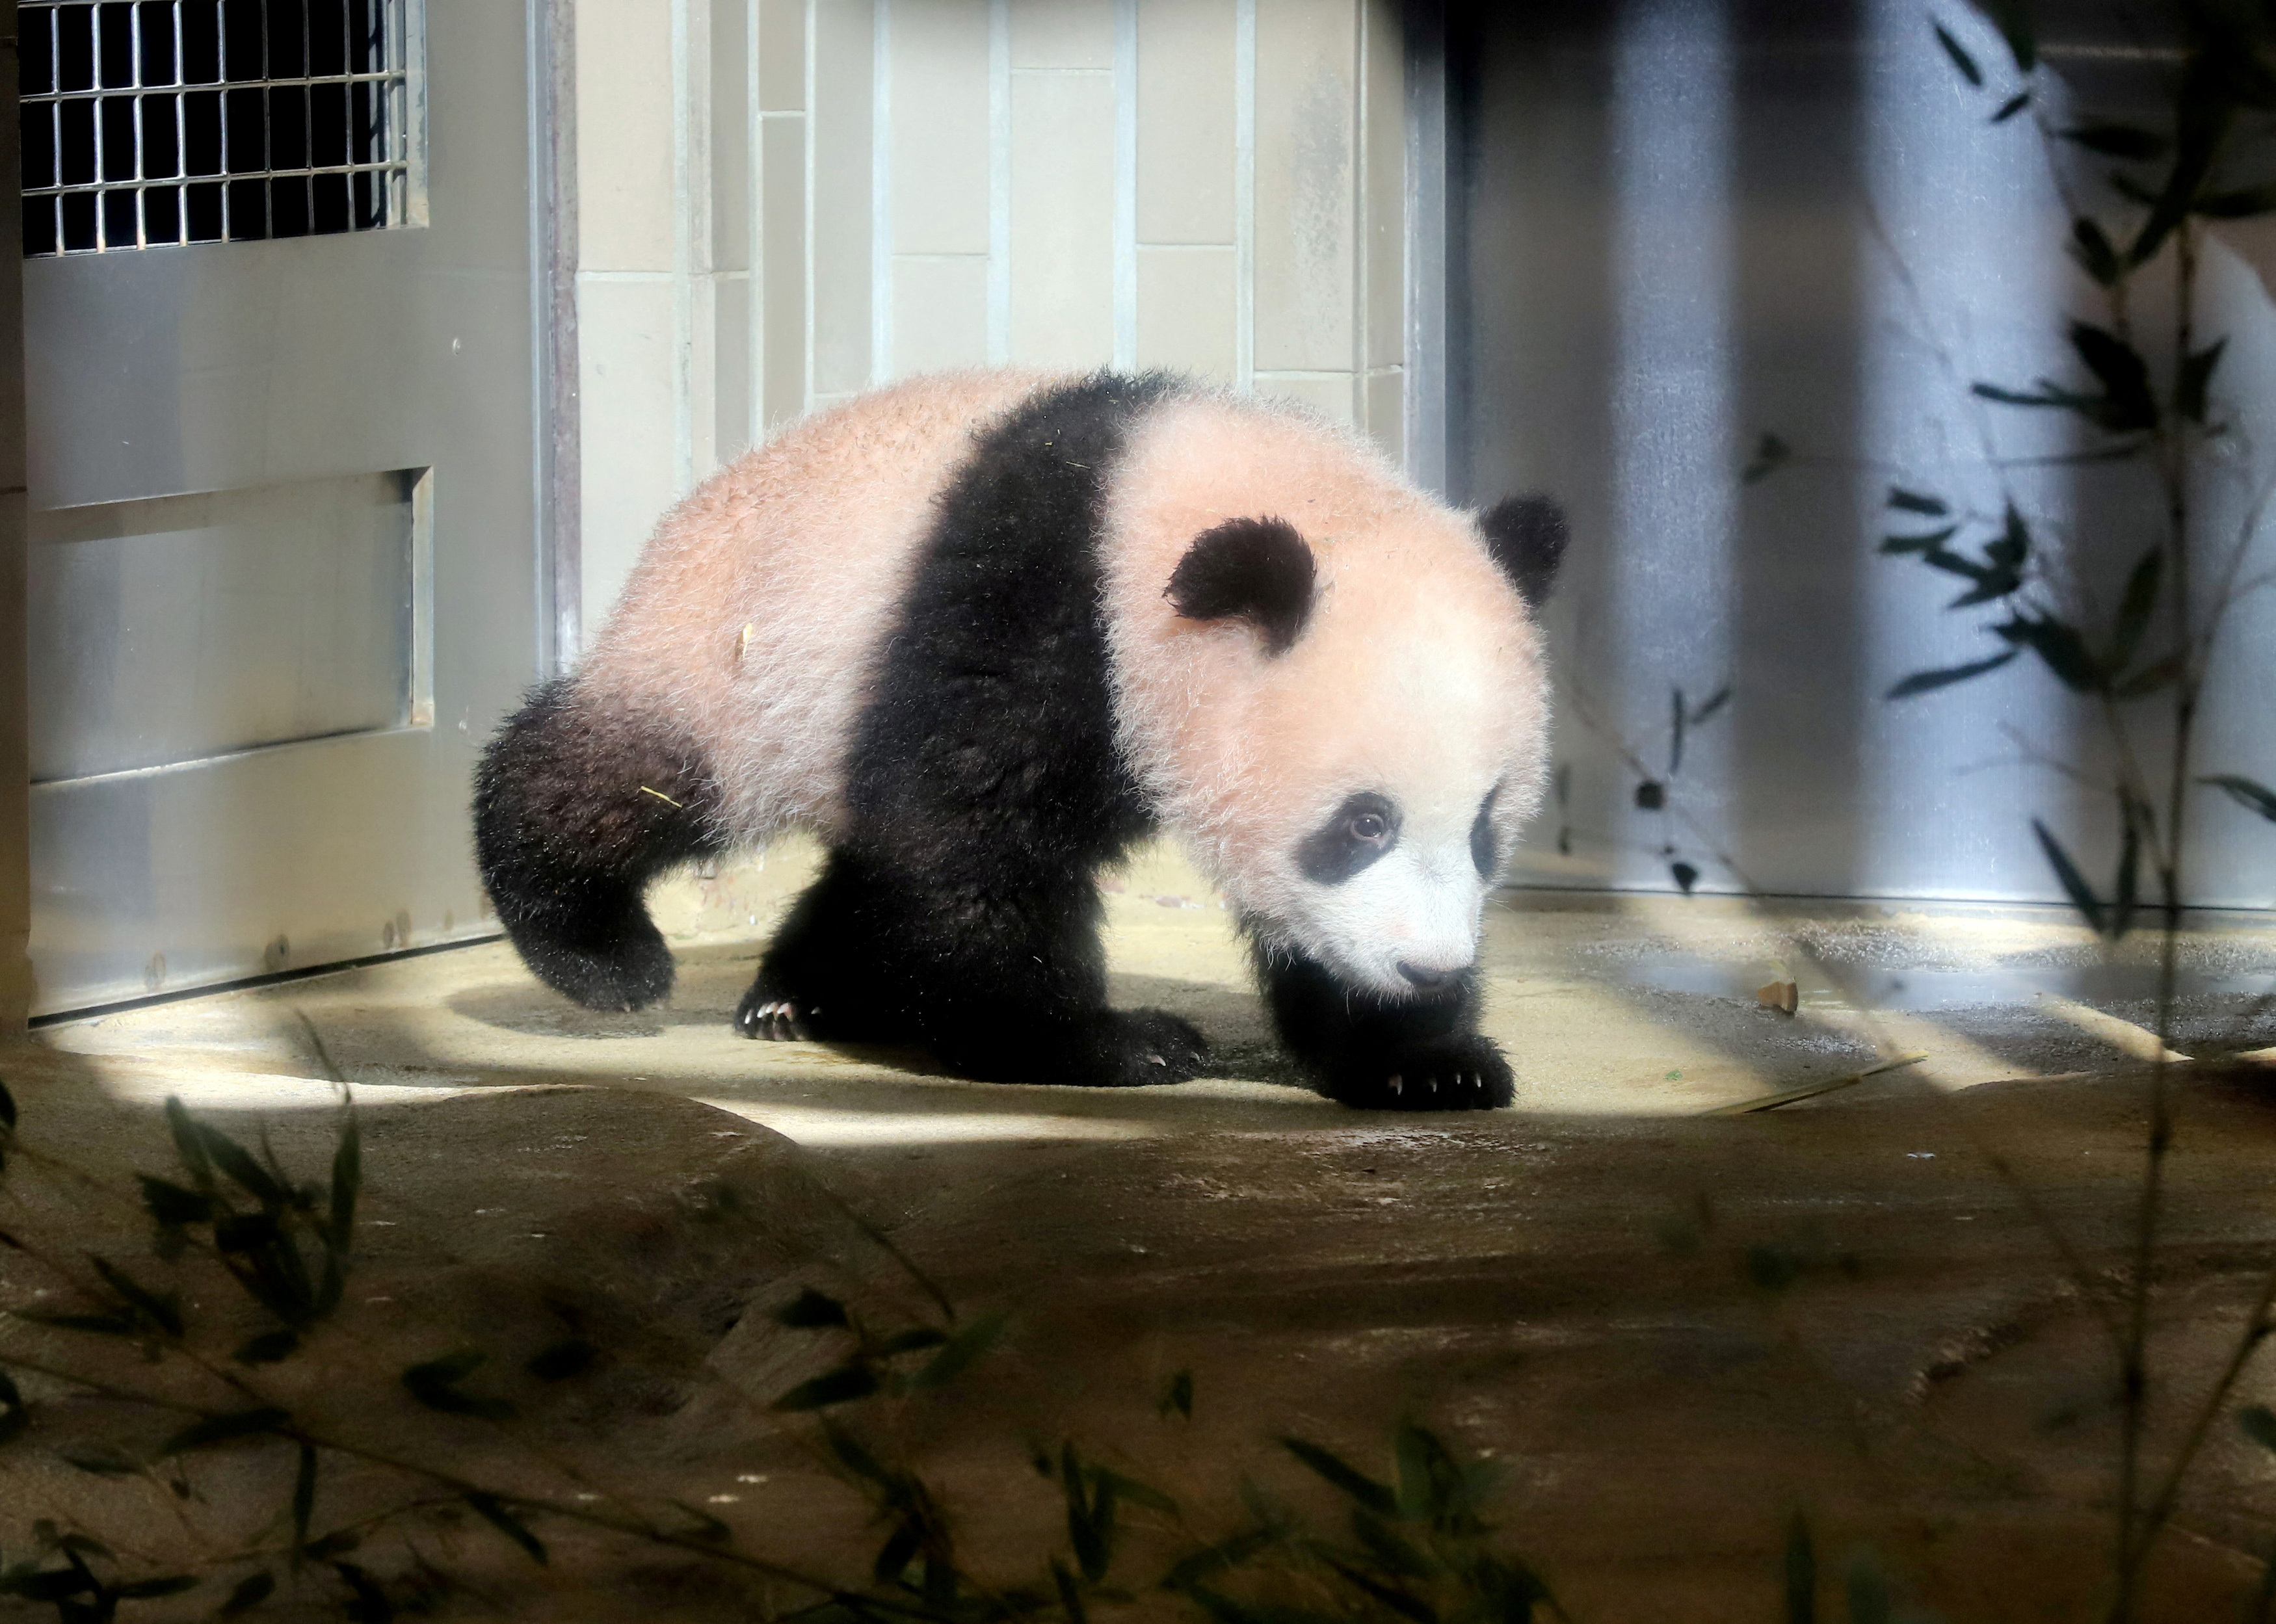 A baby panda Xiang Xiang walks on the ground during a press preview ahead of the public debut at Ueno Zoological Gardens in Tokyo